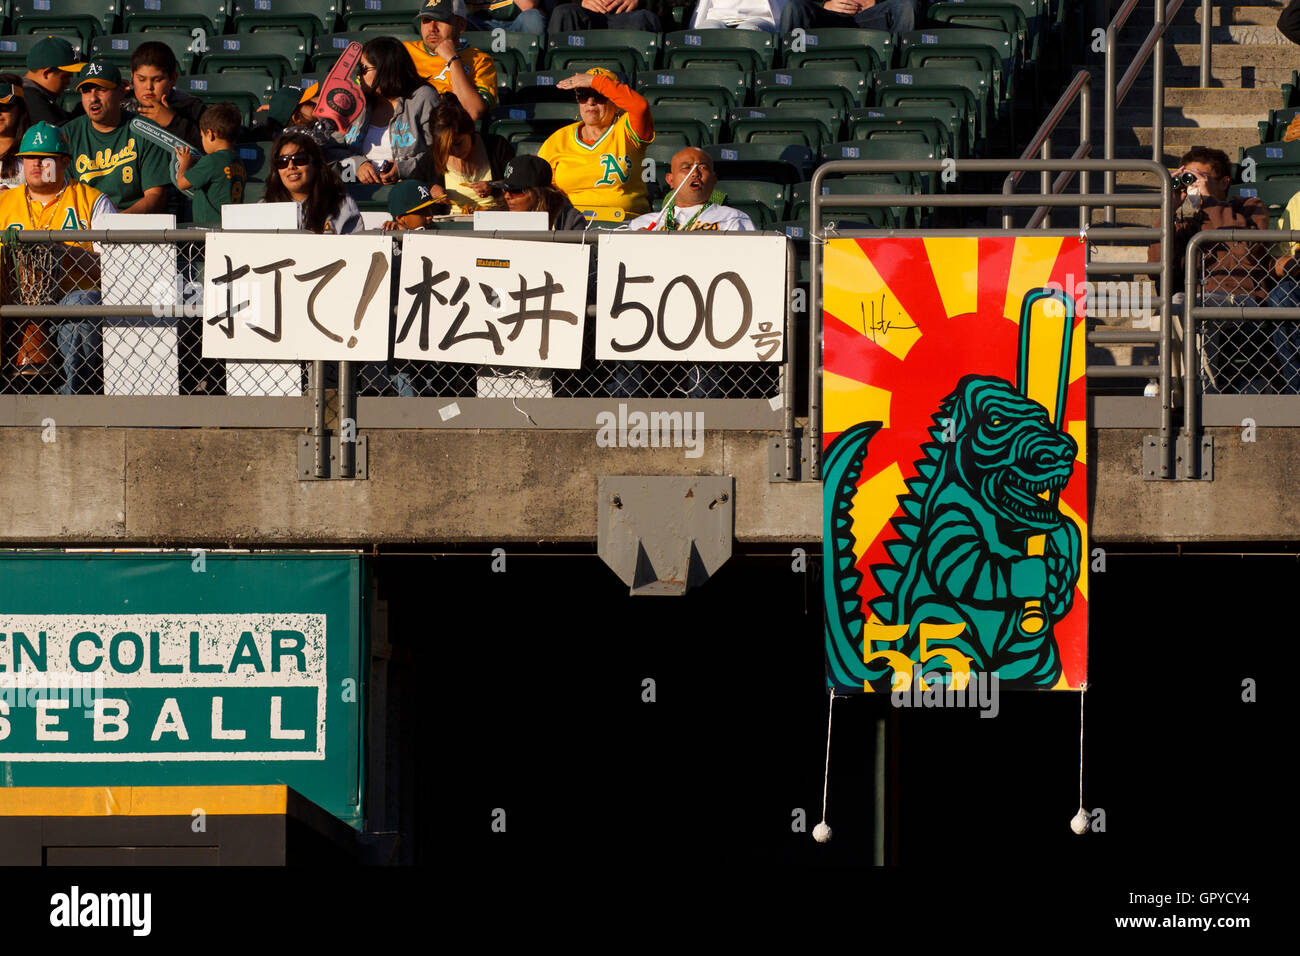 June 29, 2011; Oakland, CA, USA; Fans of Oakland Athletics designated hitter Hideki Matsui (not pictured) hang signs in anticipation of his 500th professional career home run during the first inning against the Florida Marlins the game at the O.co Coliseu Stock Photo